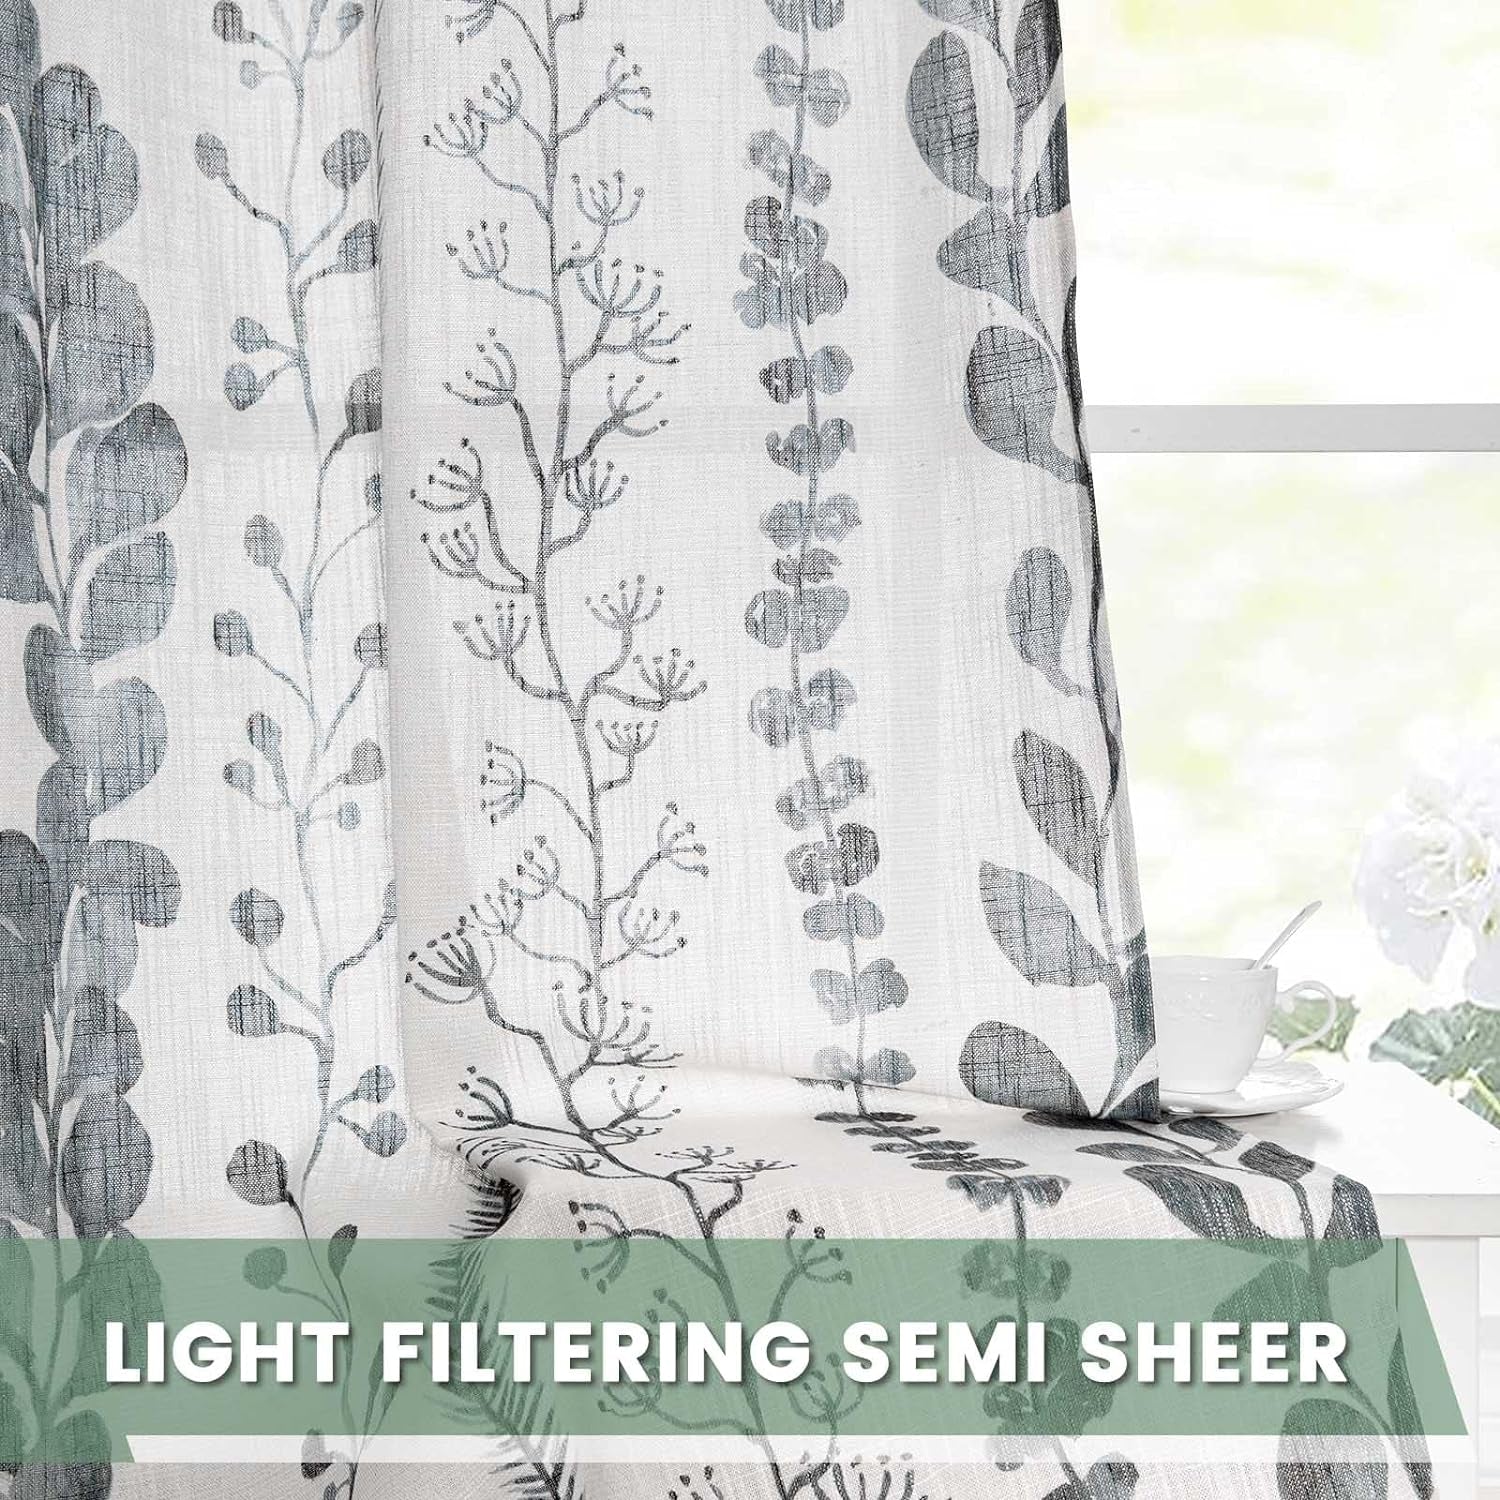 Boho Curtains for Living Room Light Filtering Privacy Protection Cotton Curtains 84 Inch Length 2 Panels Bohemian Linen Style Back Tab Window Leaf Print Classical Drapes for Dining Room  MEETSKY   